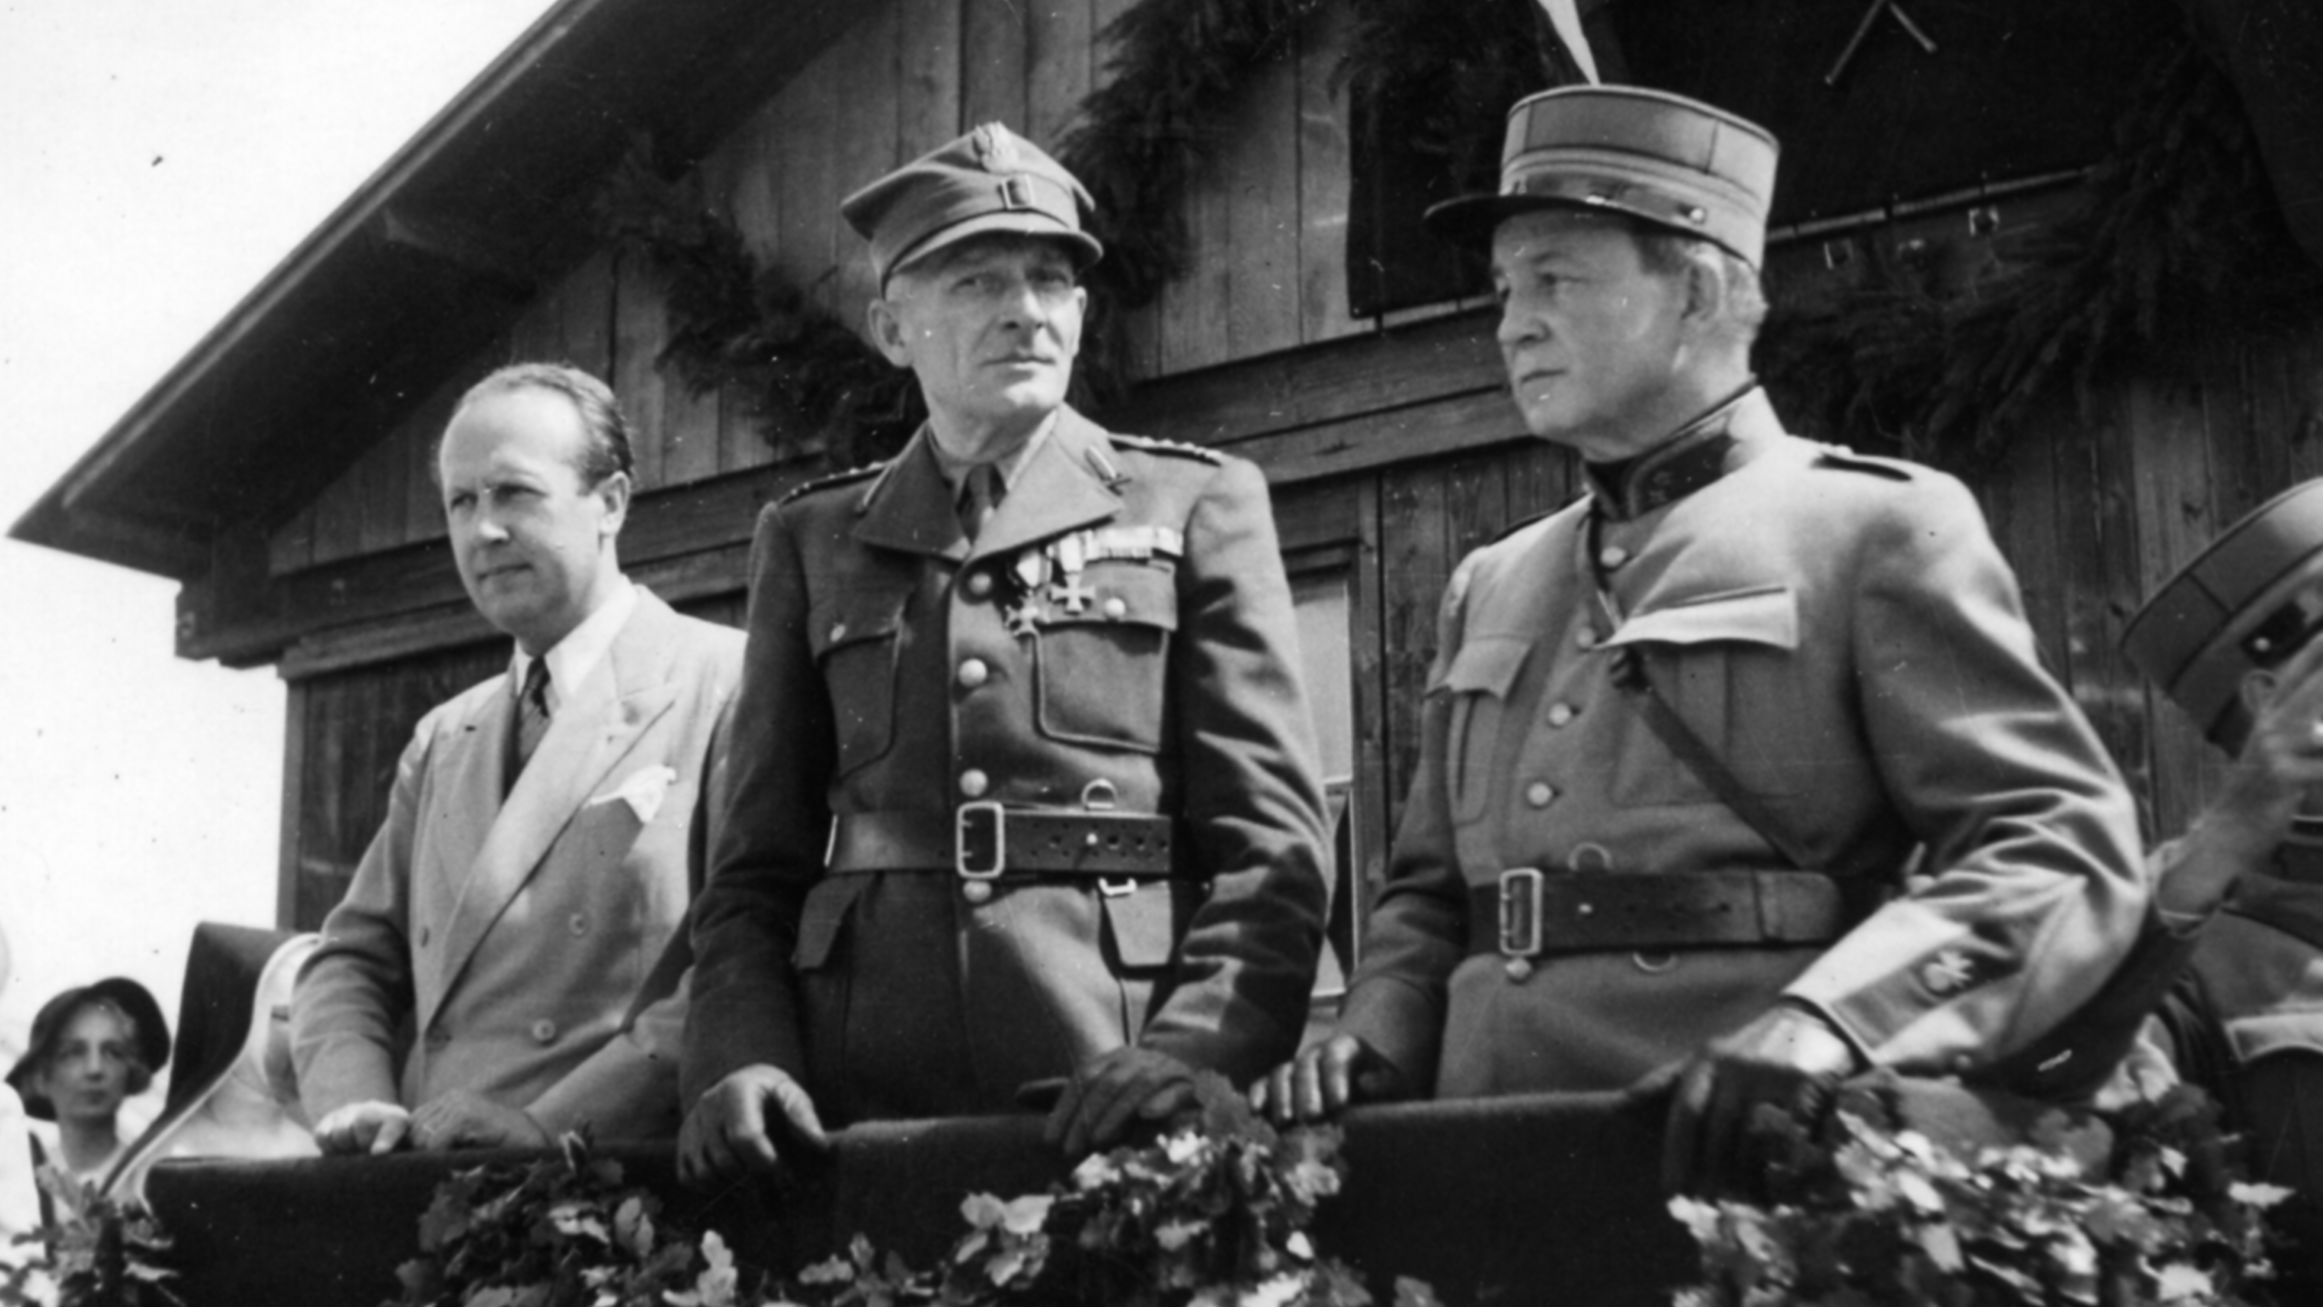 Photo taken during Ryniewicz's visit to one of the camps of Polish soldiers in Switzerland (between 1940-1945) in the capacity of the Head of the Political Division of the Polish Legation (Archivum Helveto-Polonicum, Fribour).